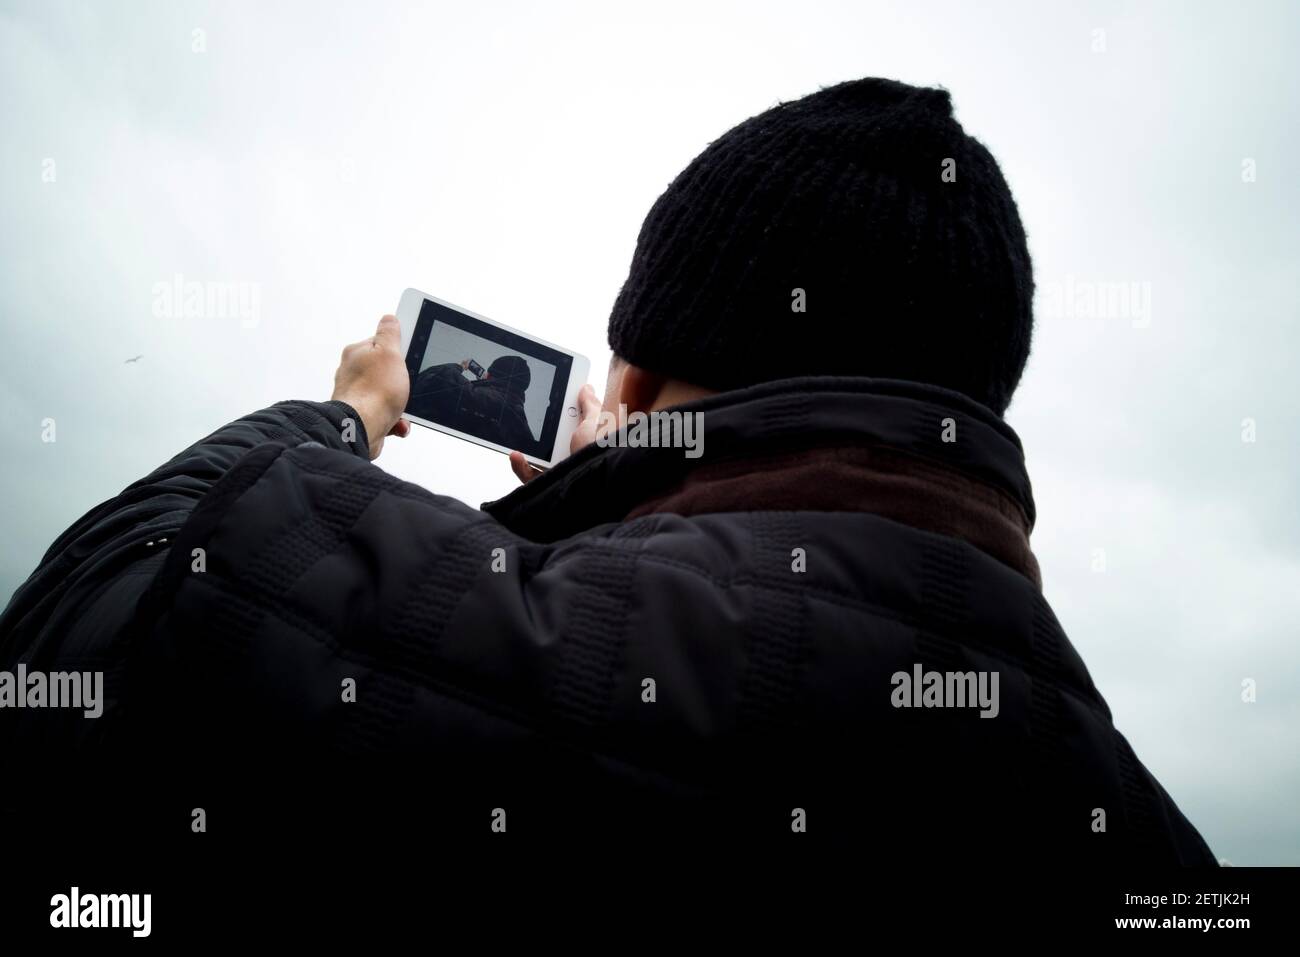 man holding tablet in foggy day outside shot Stock Photo